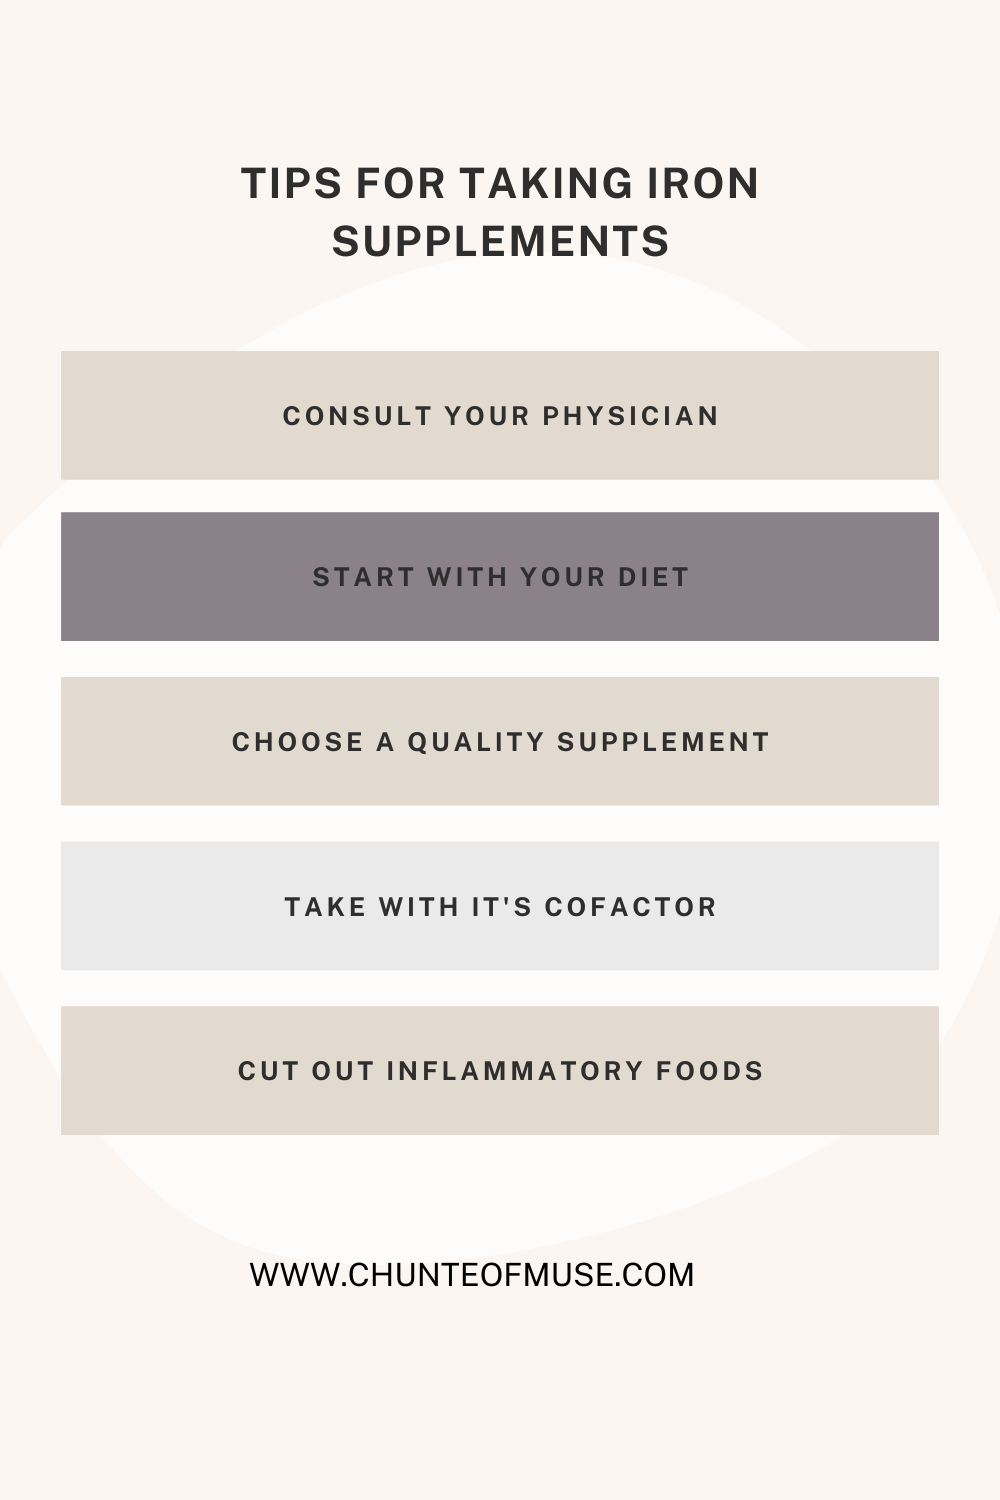 Iron supplement tips pin.png